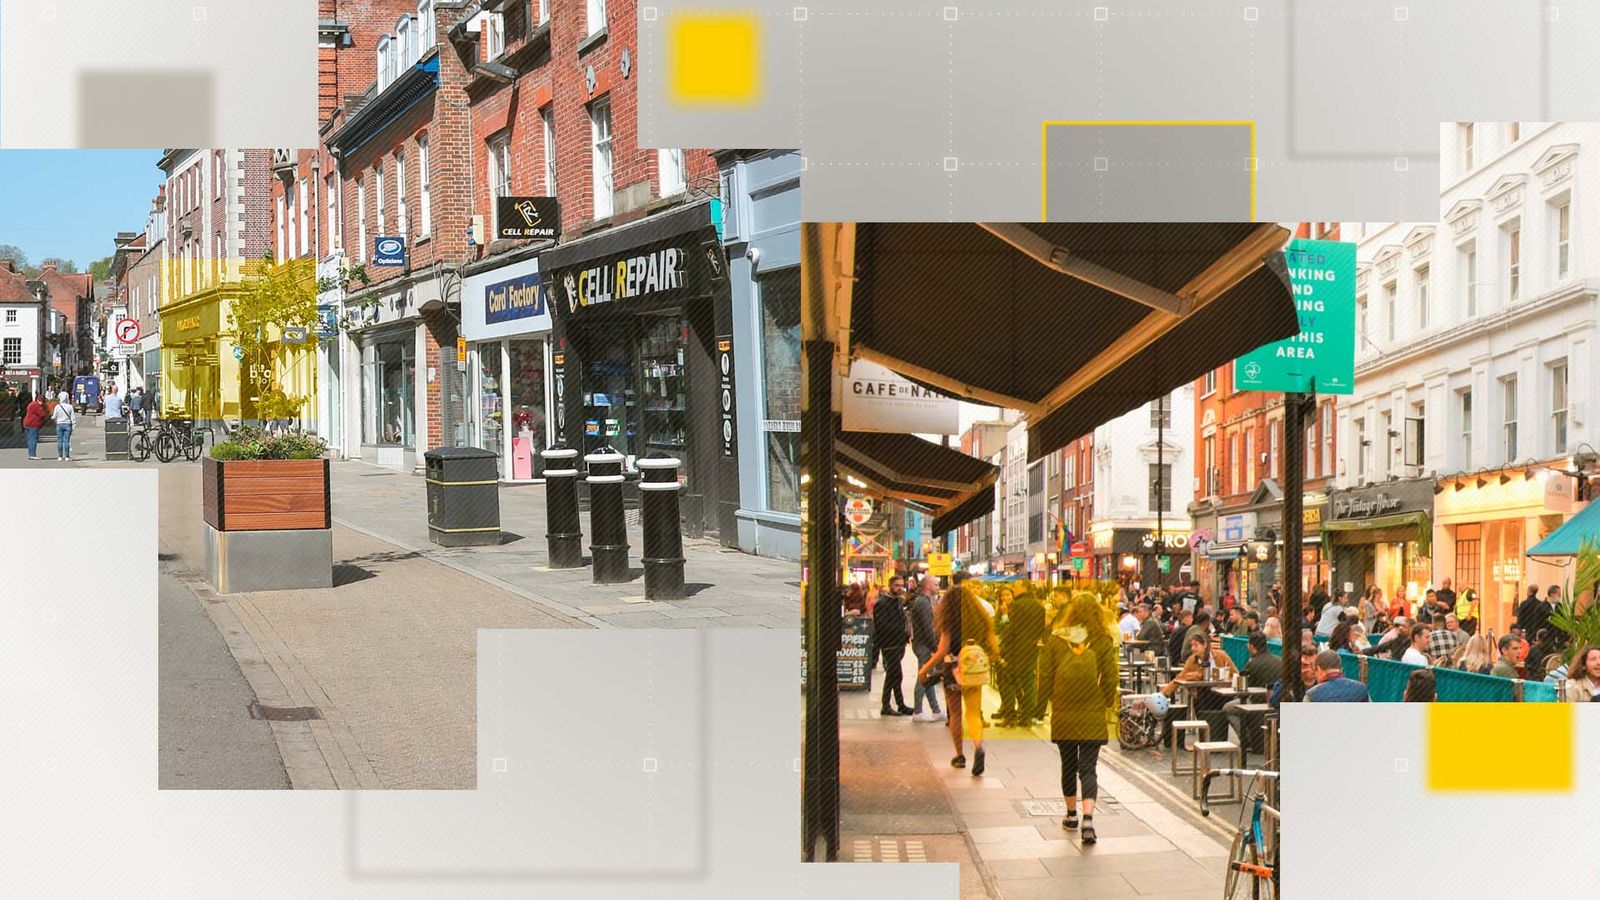 Can cafe culture and more social opportunities save the high street?